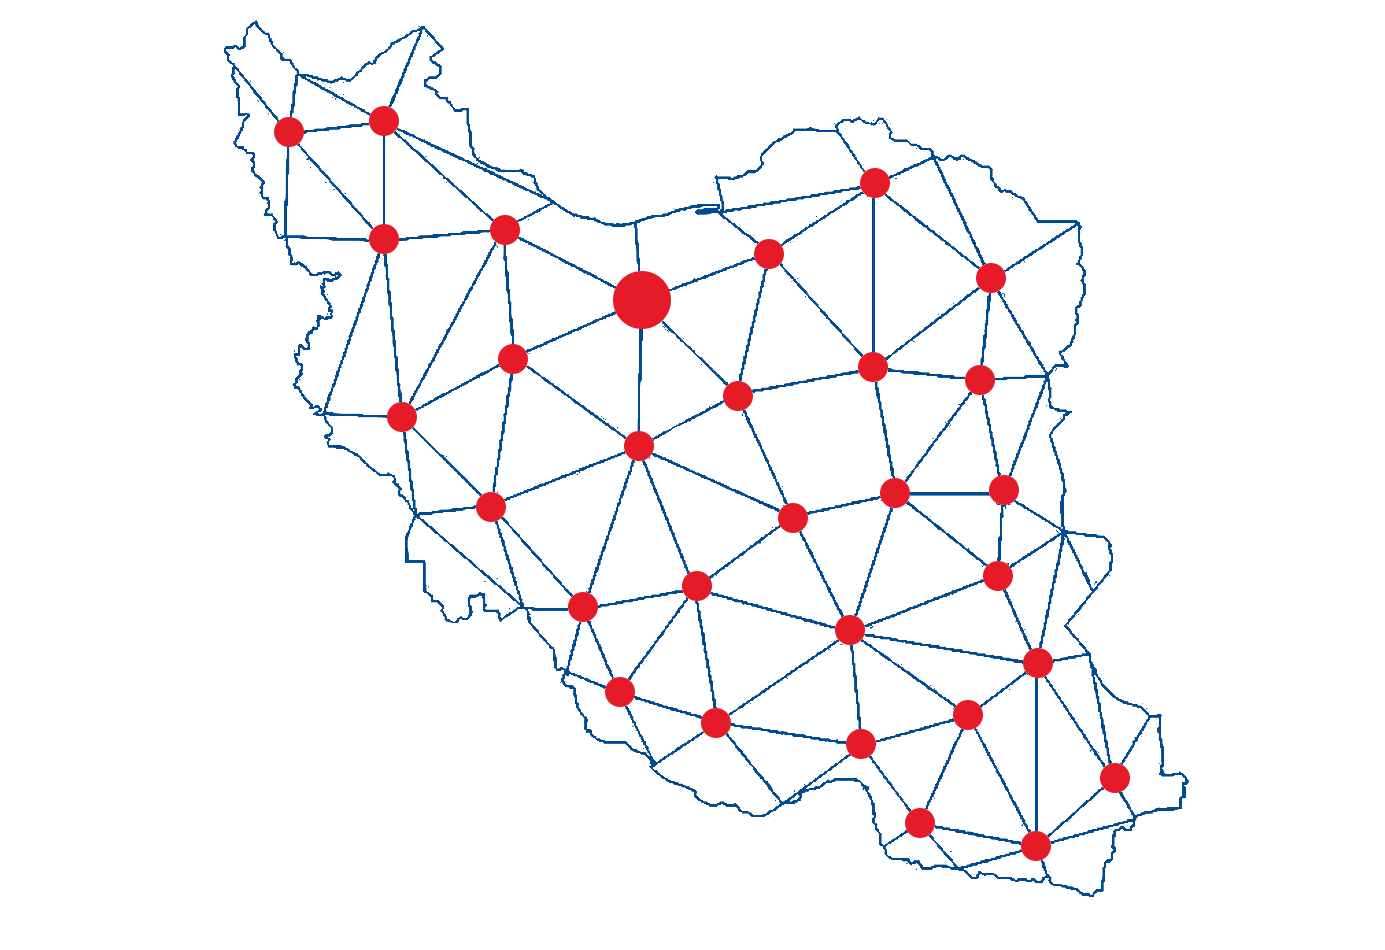 sale networks